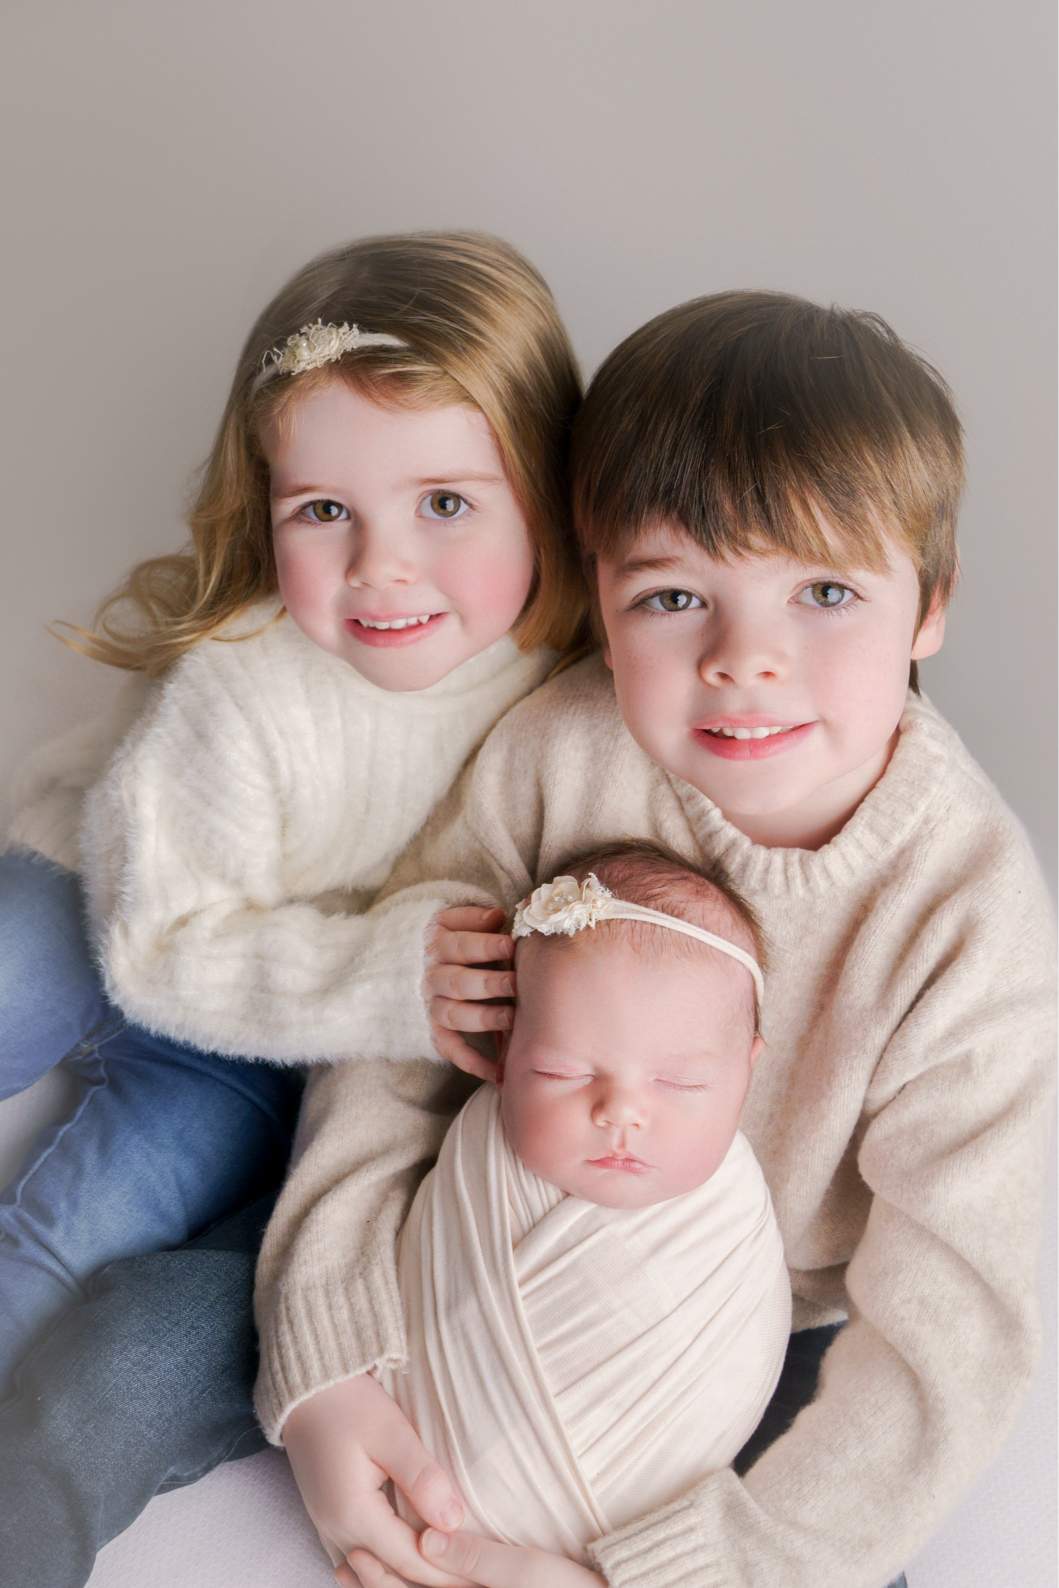 A girl and a boy holding their newborn baby sister lovingly